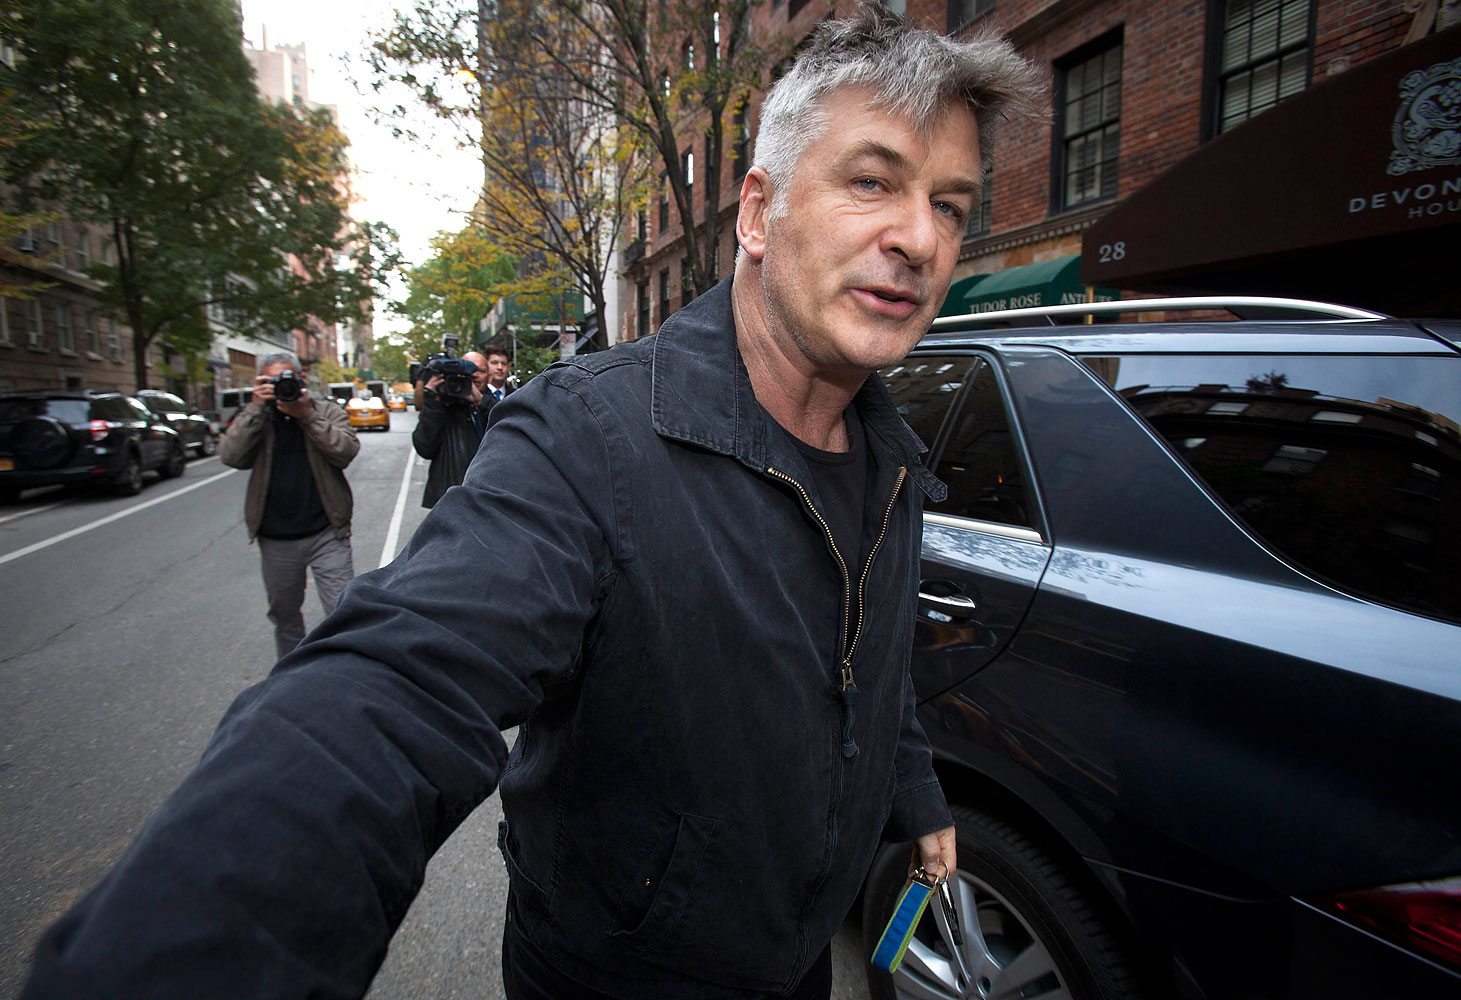 Actor Alec Baldwin shoves a photographer and tells him to move out of his way after he arrived in his SUV at the building where he lives in New York